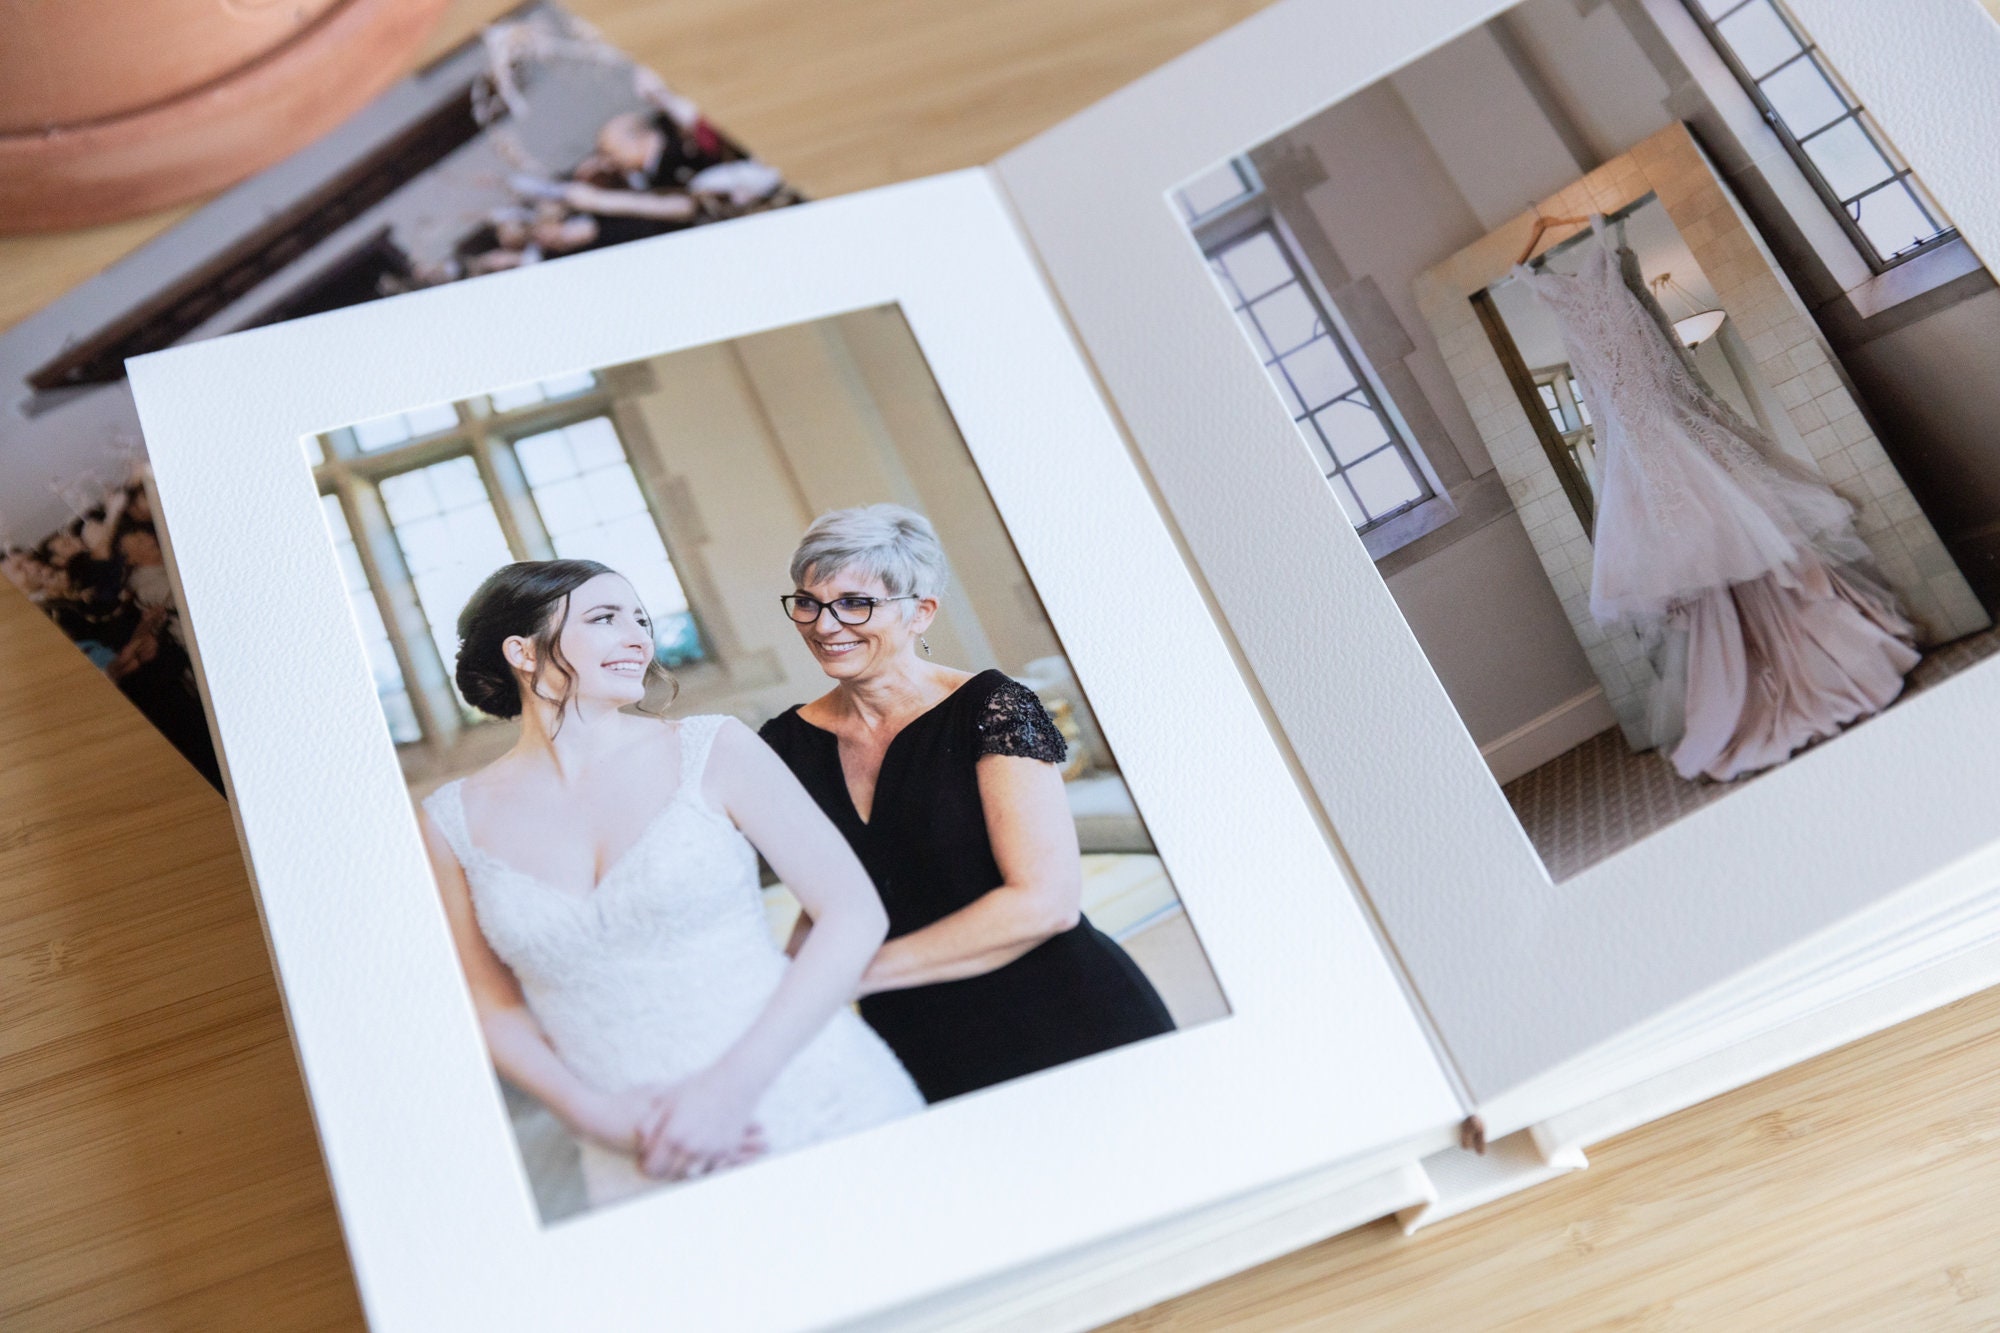 Matted Photo Album: 5x7 - Create your own Unique Cover Design - The  Photographer's Toolbox